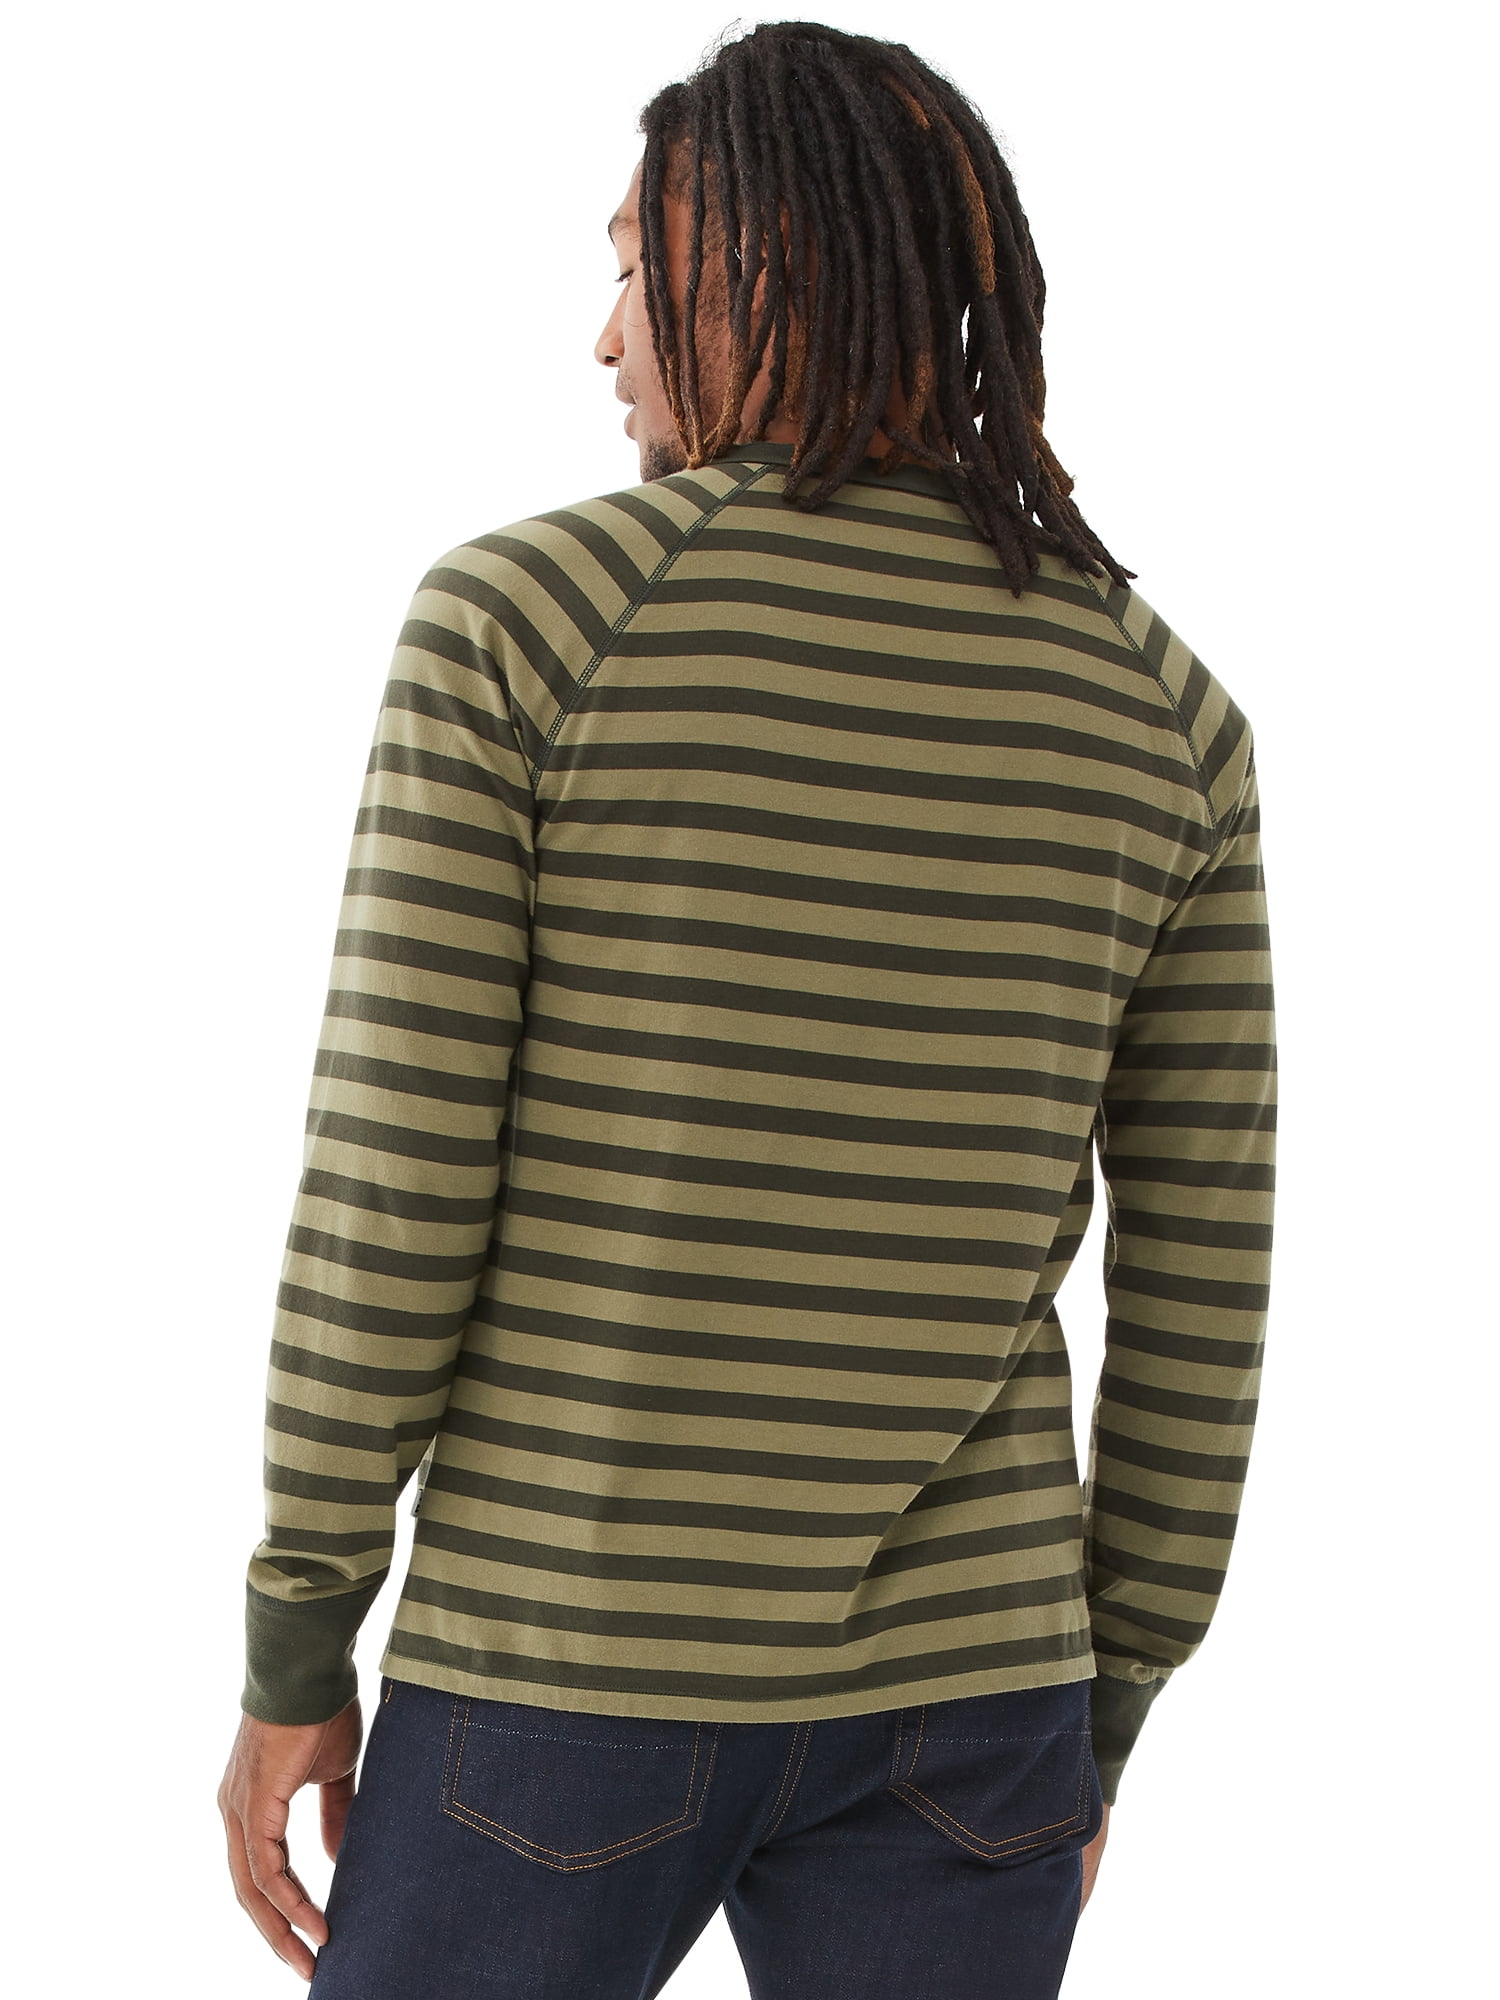 Free Assembly Men's Everyday Long-Sleeve Striped Henley Shirt